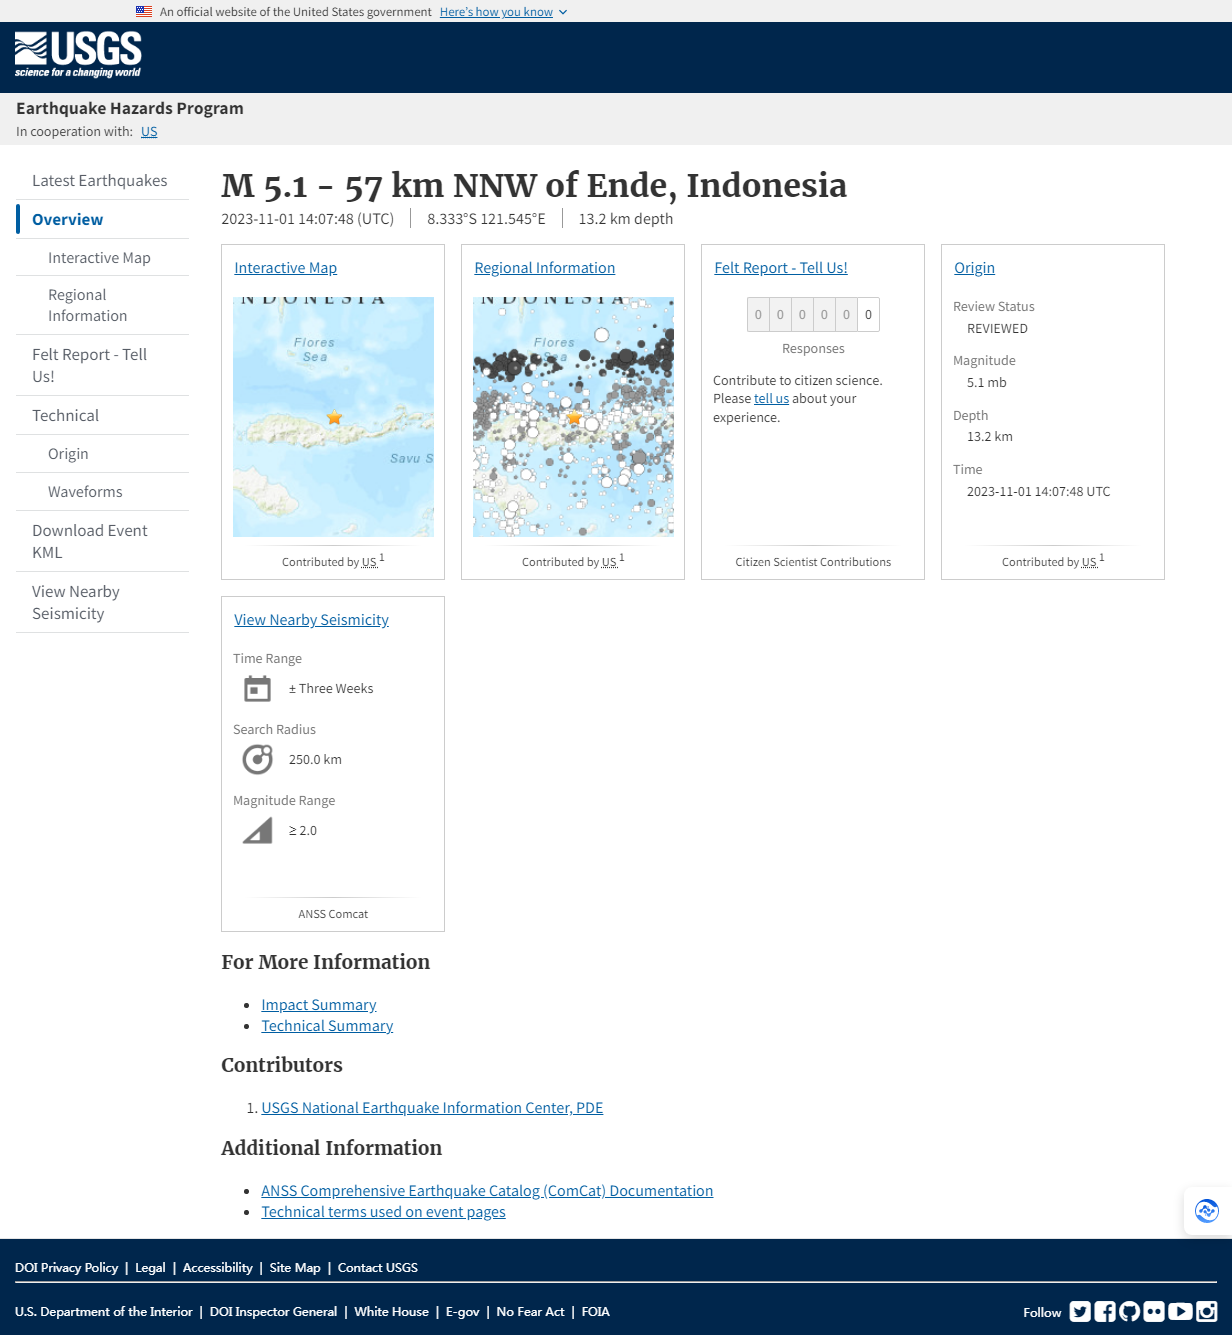 M 5.1 - 57 km NNW of Ende, Indonesia.png